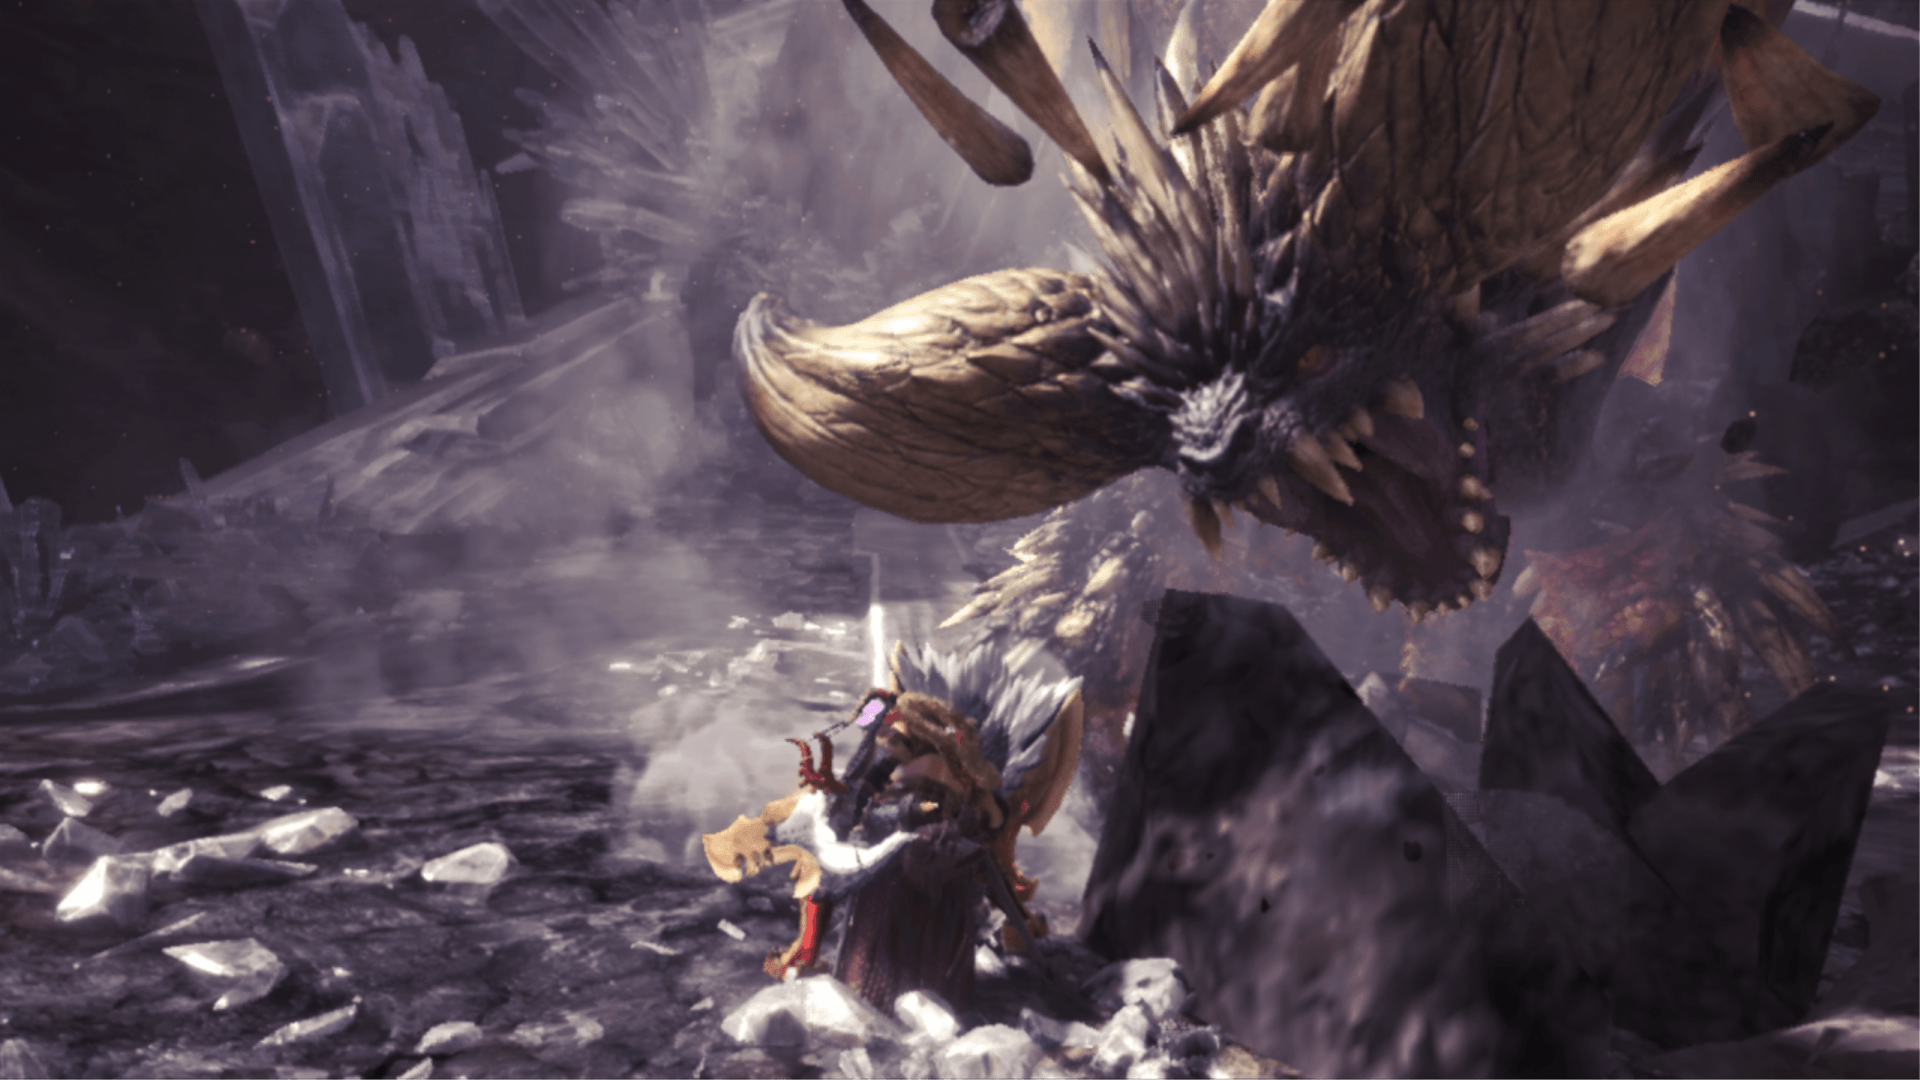 Caught this epic final screen today failing against nergigante again